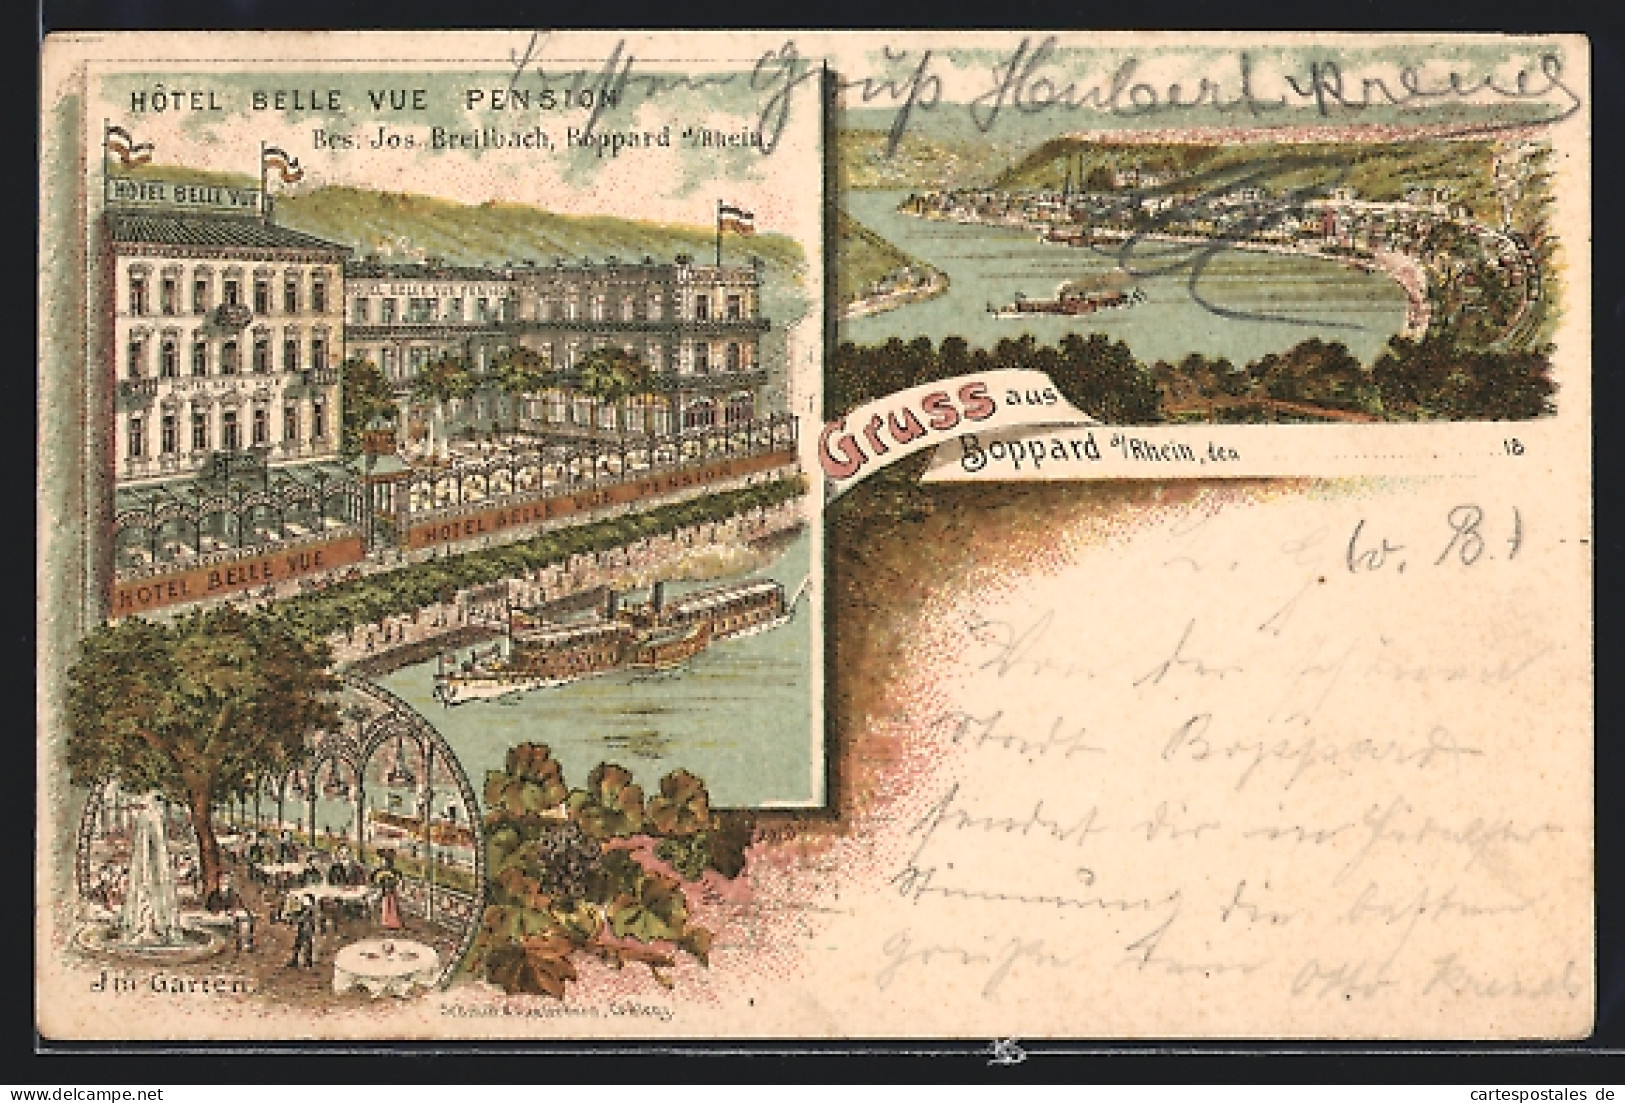 Lithographie Boppard A. Rh., Totalansicht, Hotel Belle Vue Pension  - Boppard